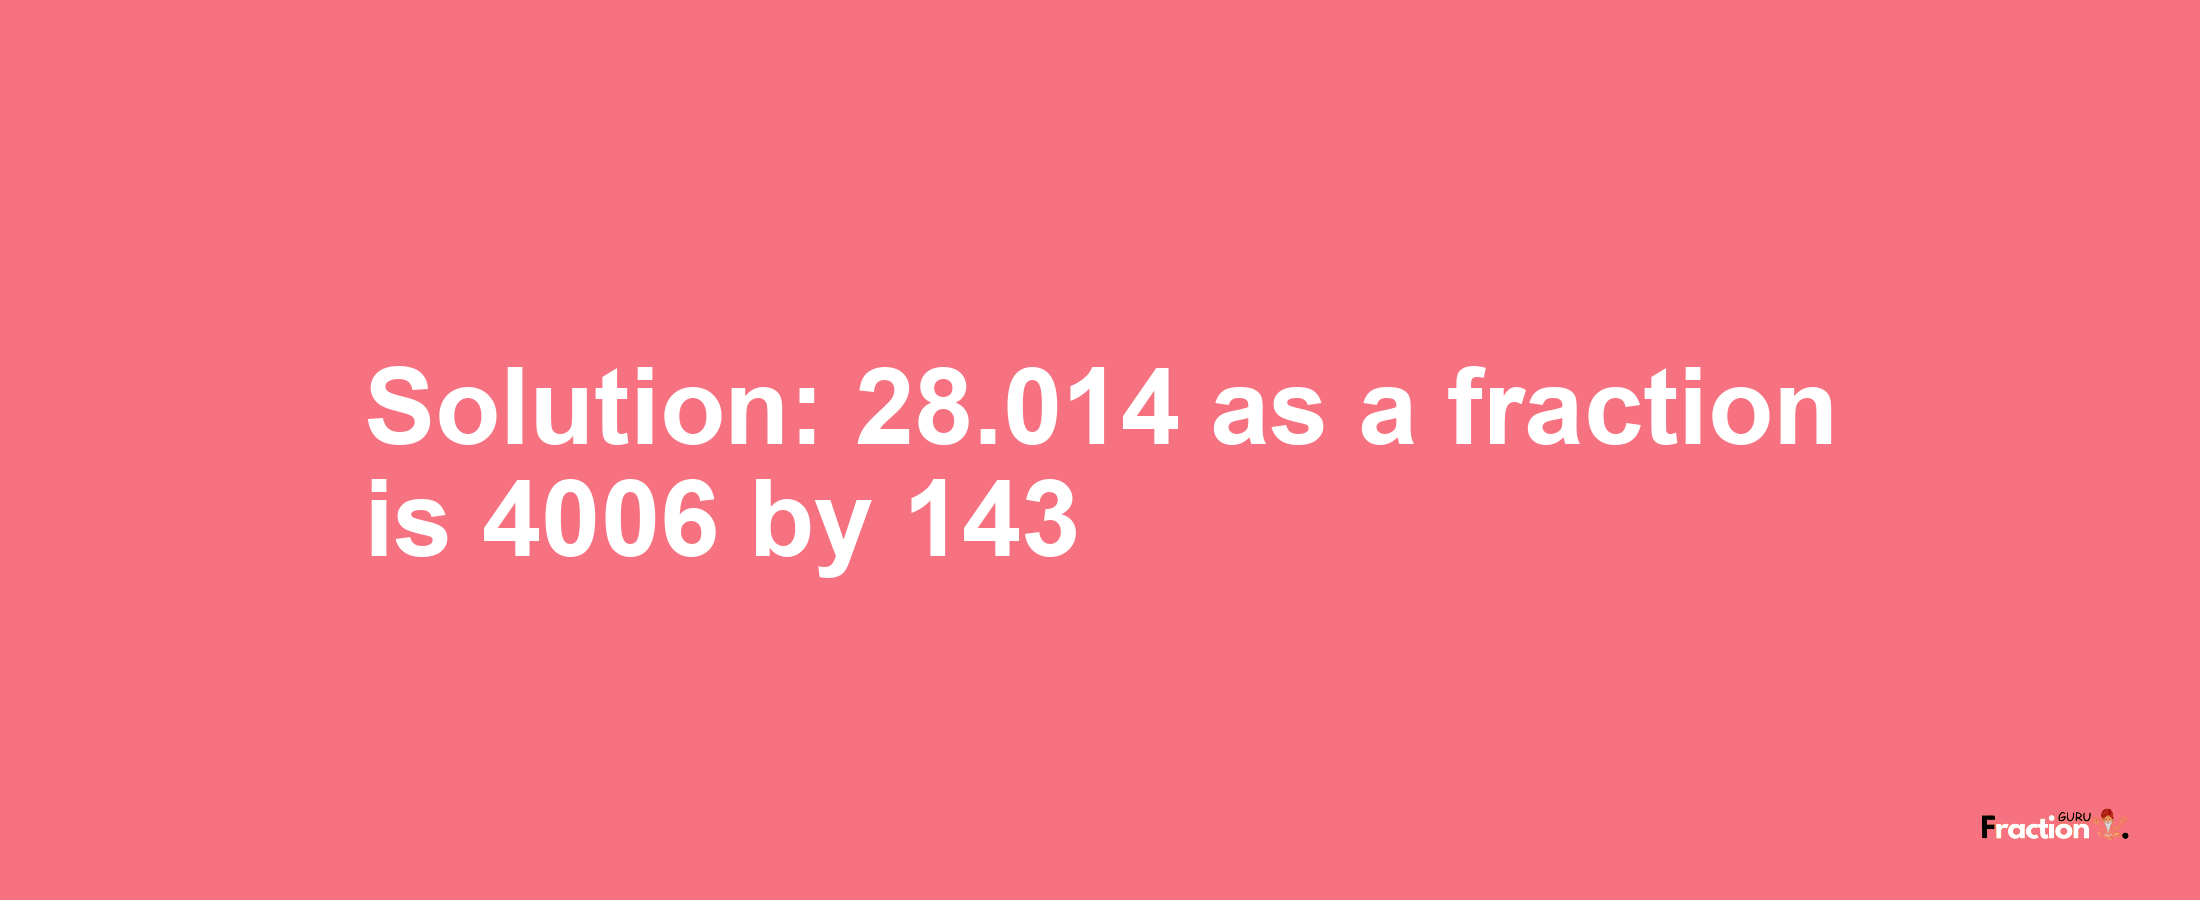 Solution:28.014 as a fraction is 4006/143